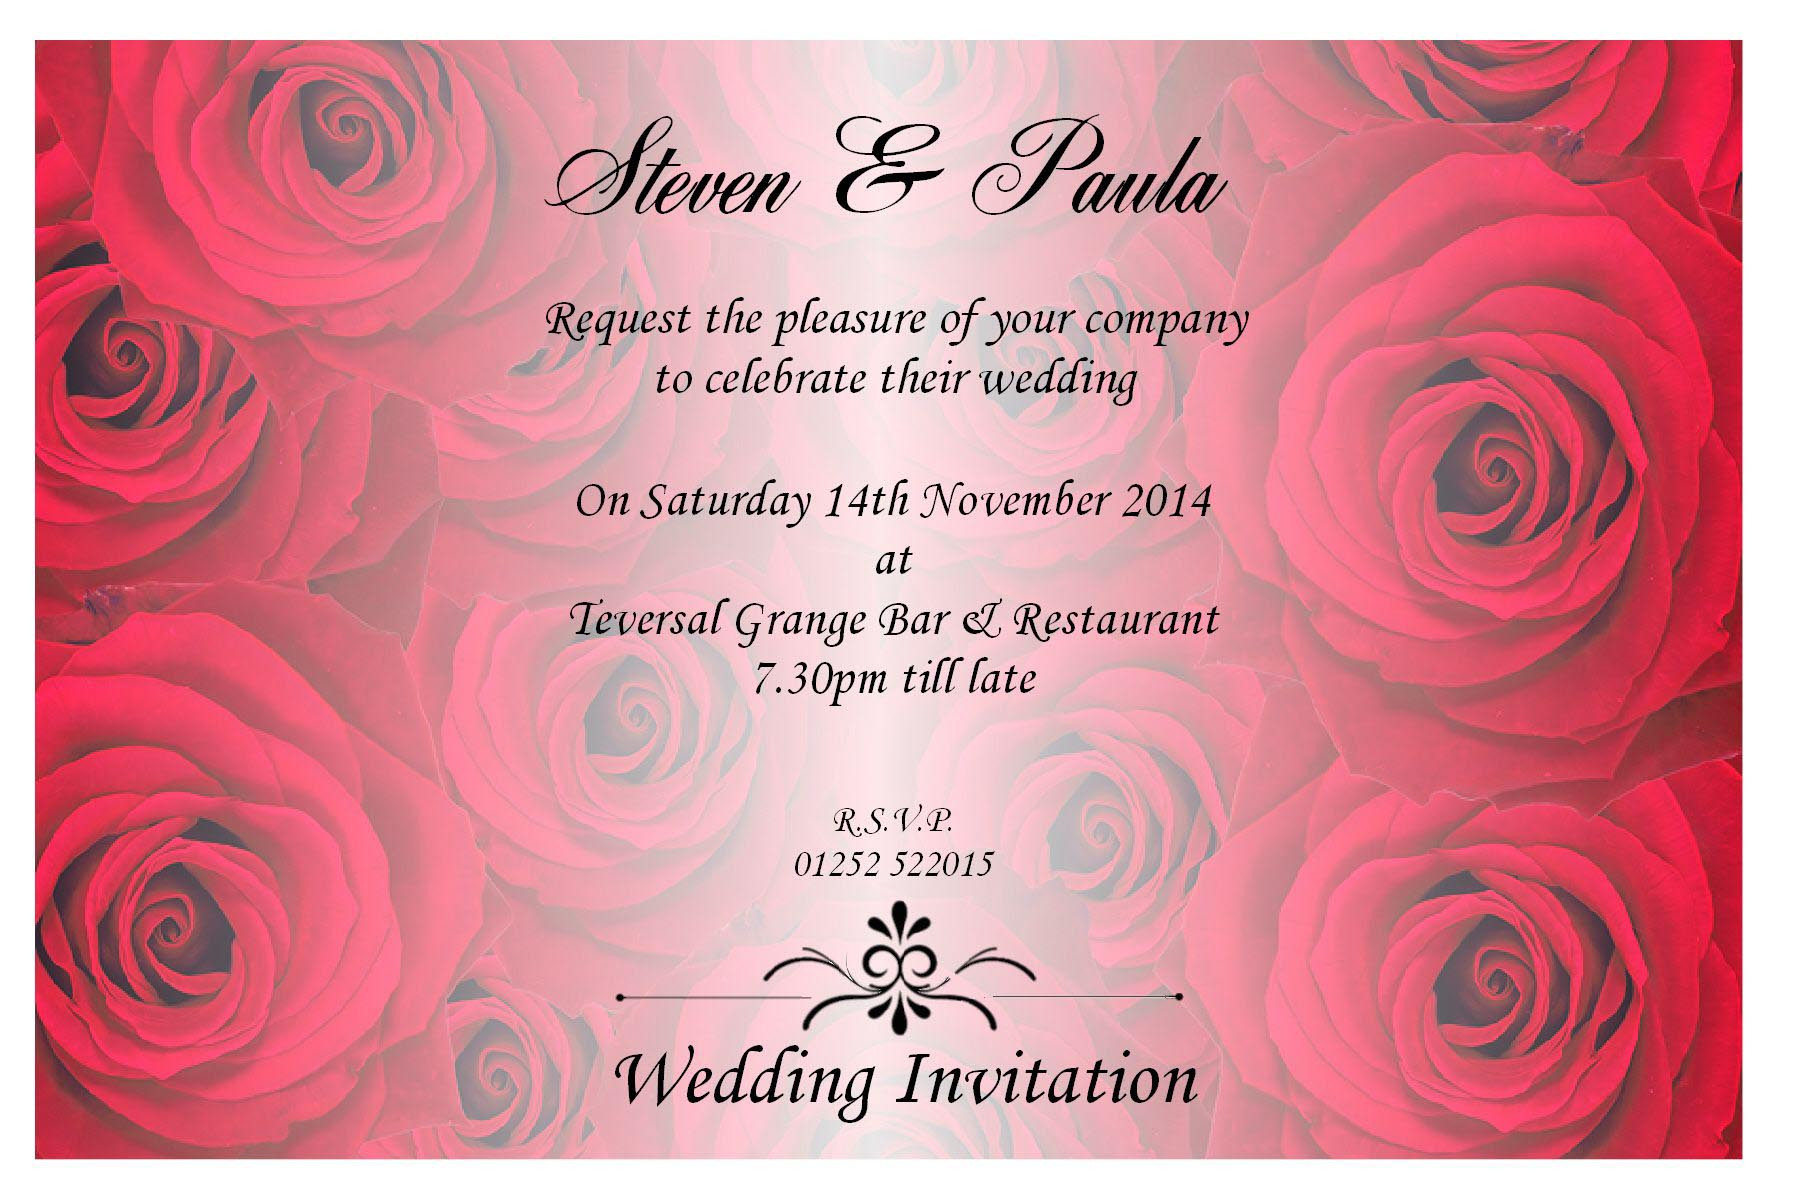 Marriage Invitation Quotes
 Romantic Marriage invitation Quotes For Indian Wedding